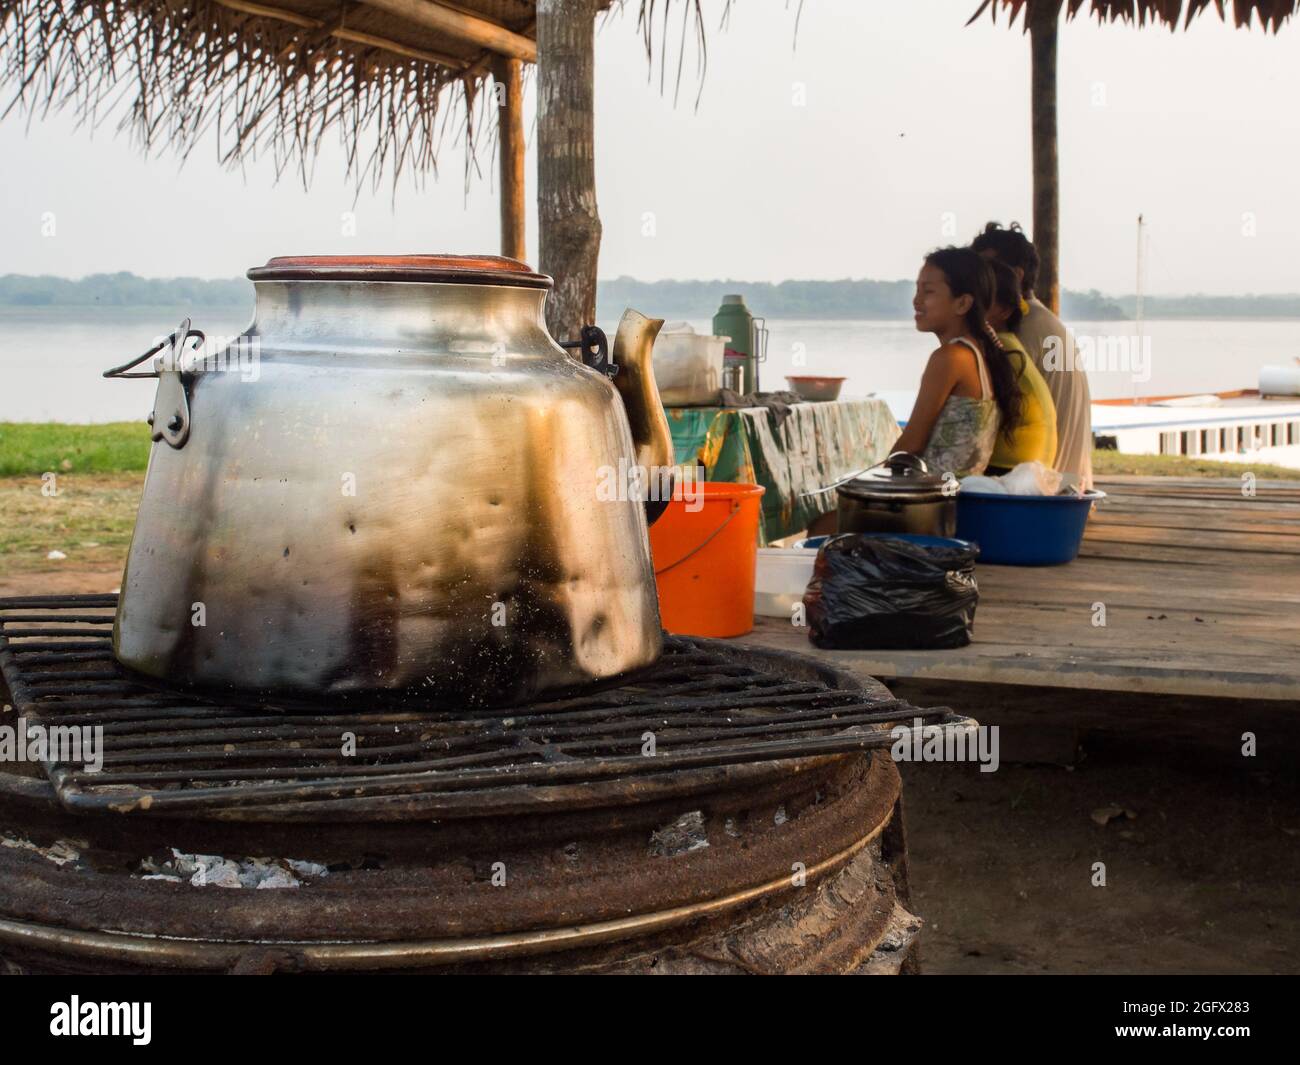 Tapioka Village, Peru - Sep , 2017: Cooking on the fireplece in the port at Amzoin River in the amazons jungle. Amazonia. Brazil. South America. Stock Photo